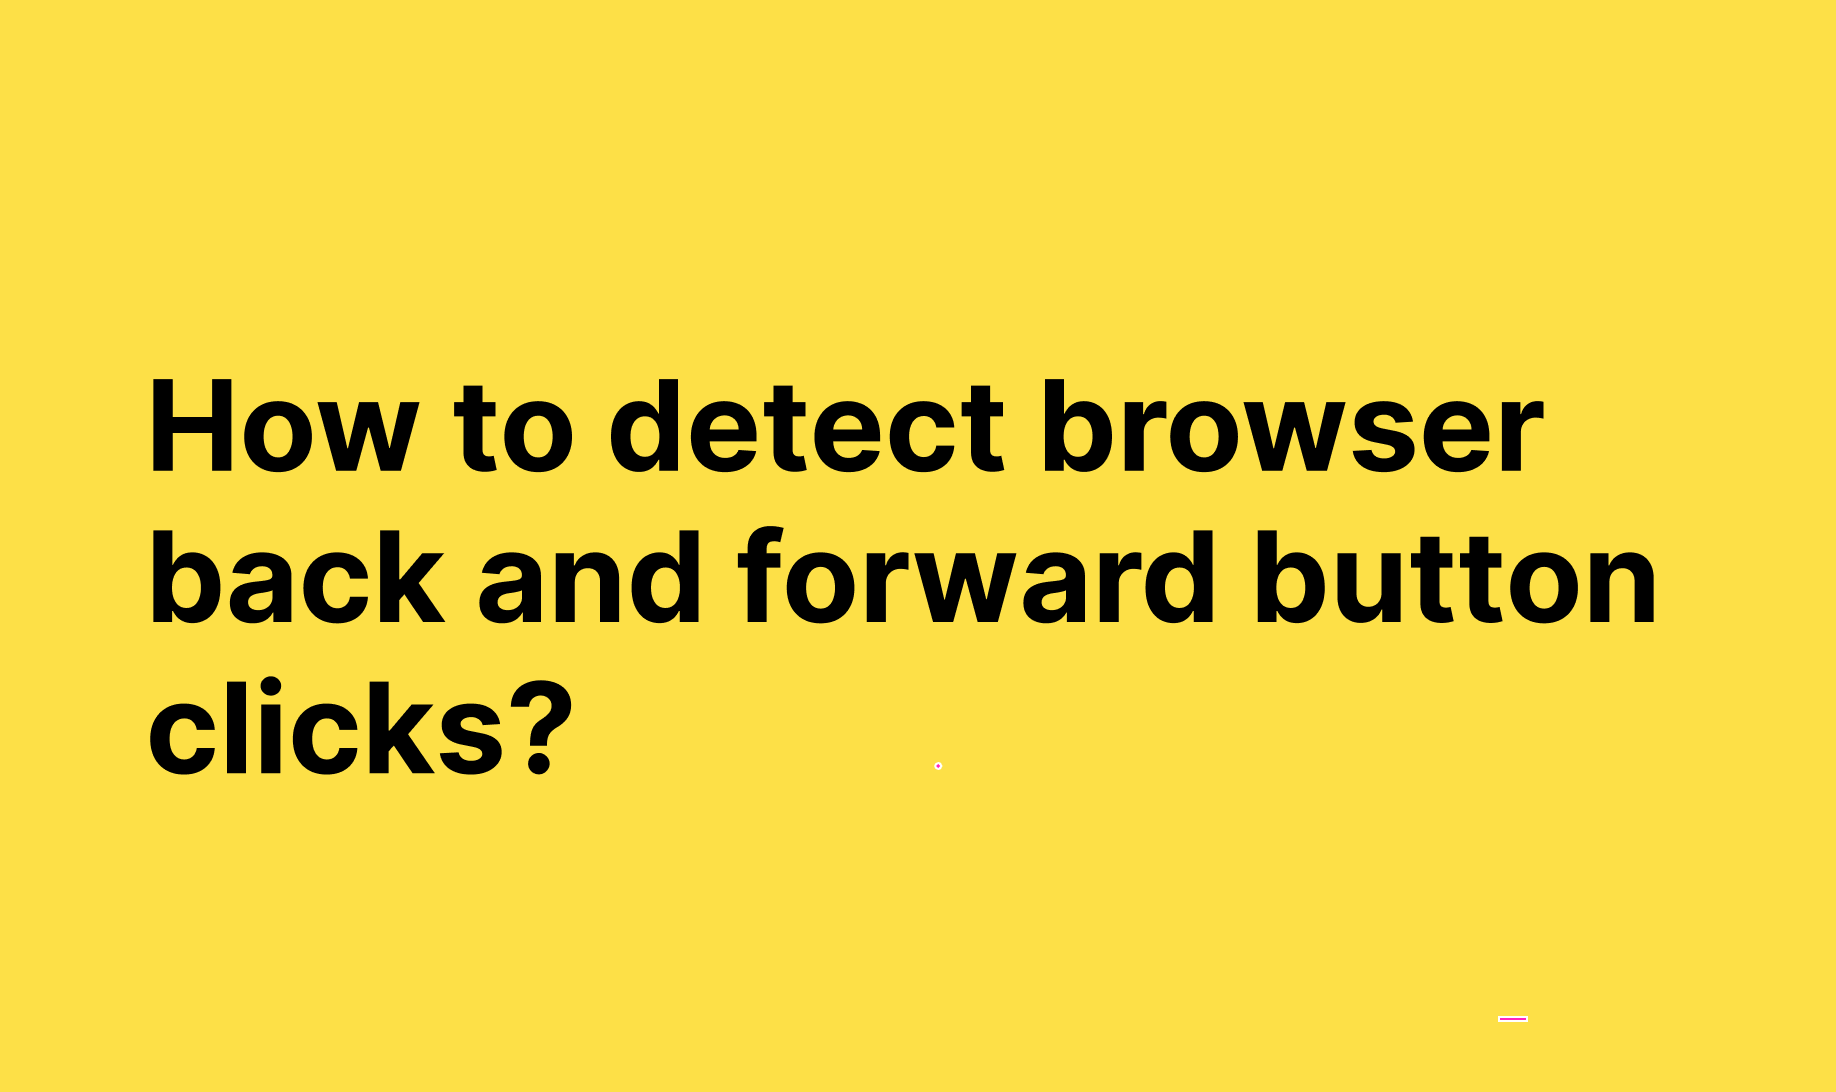 How to Detect Browser Back Button event in JavaScript